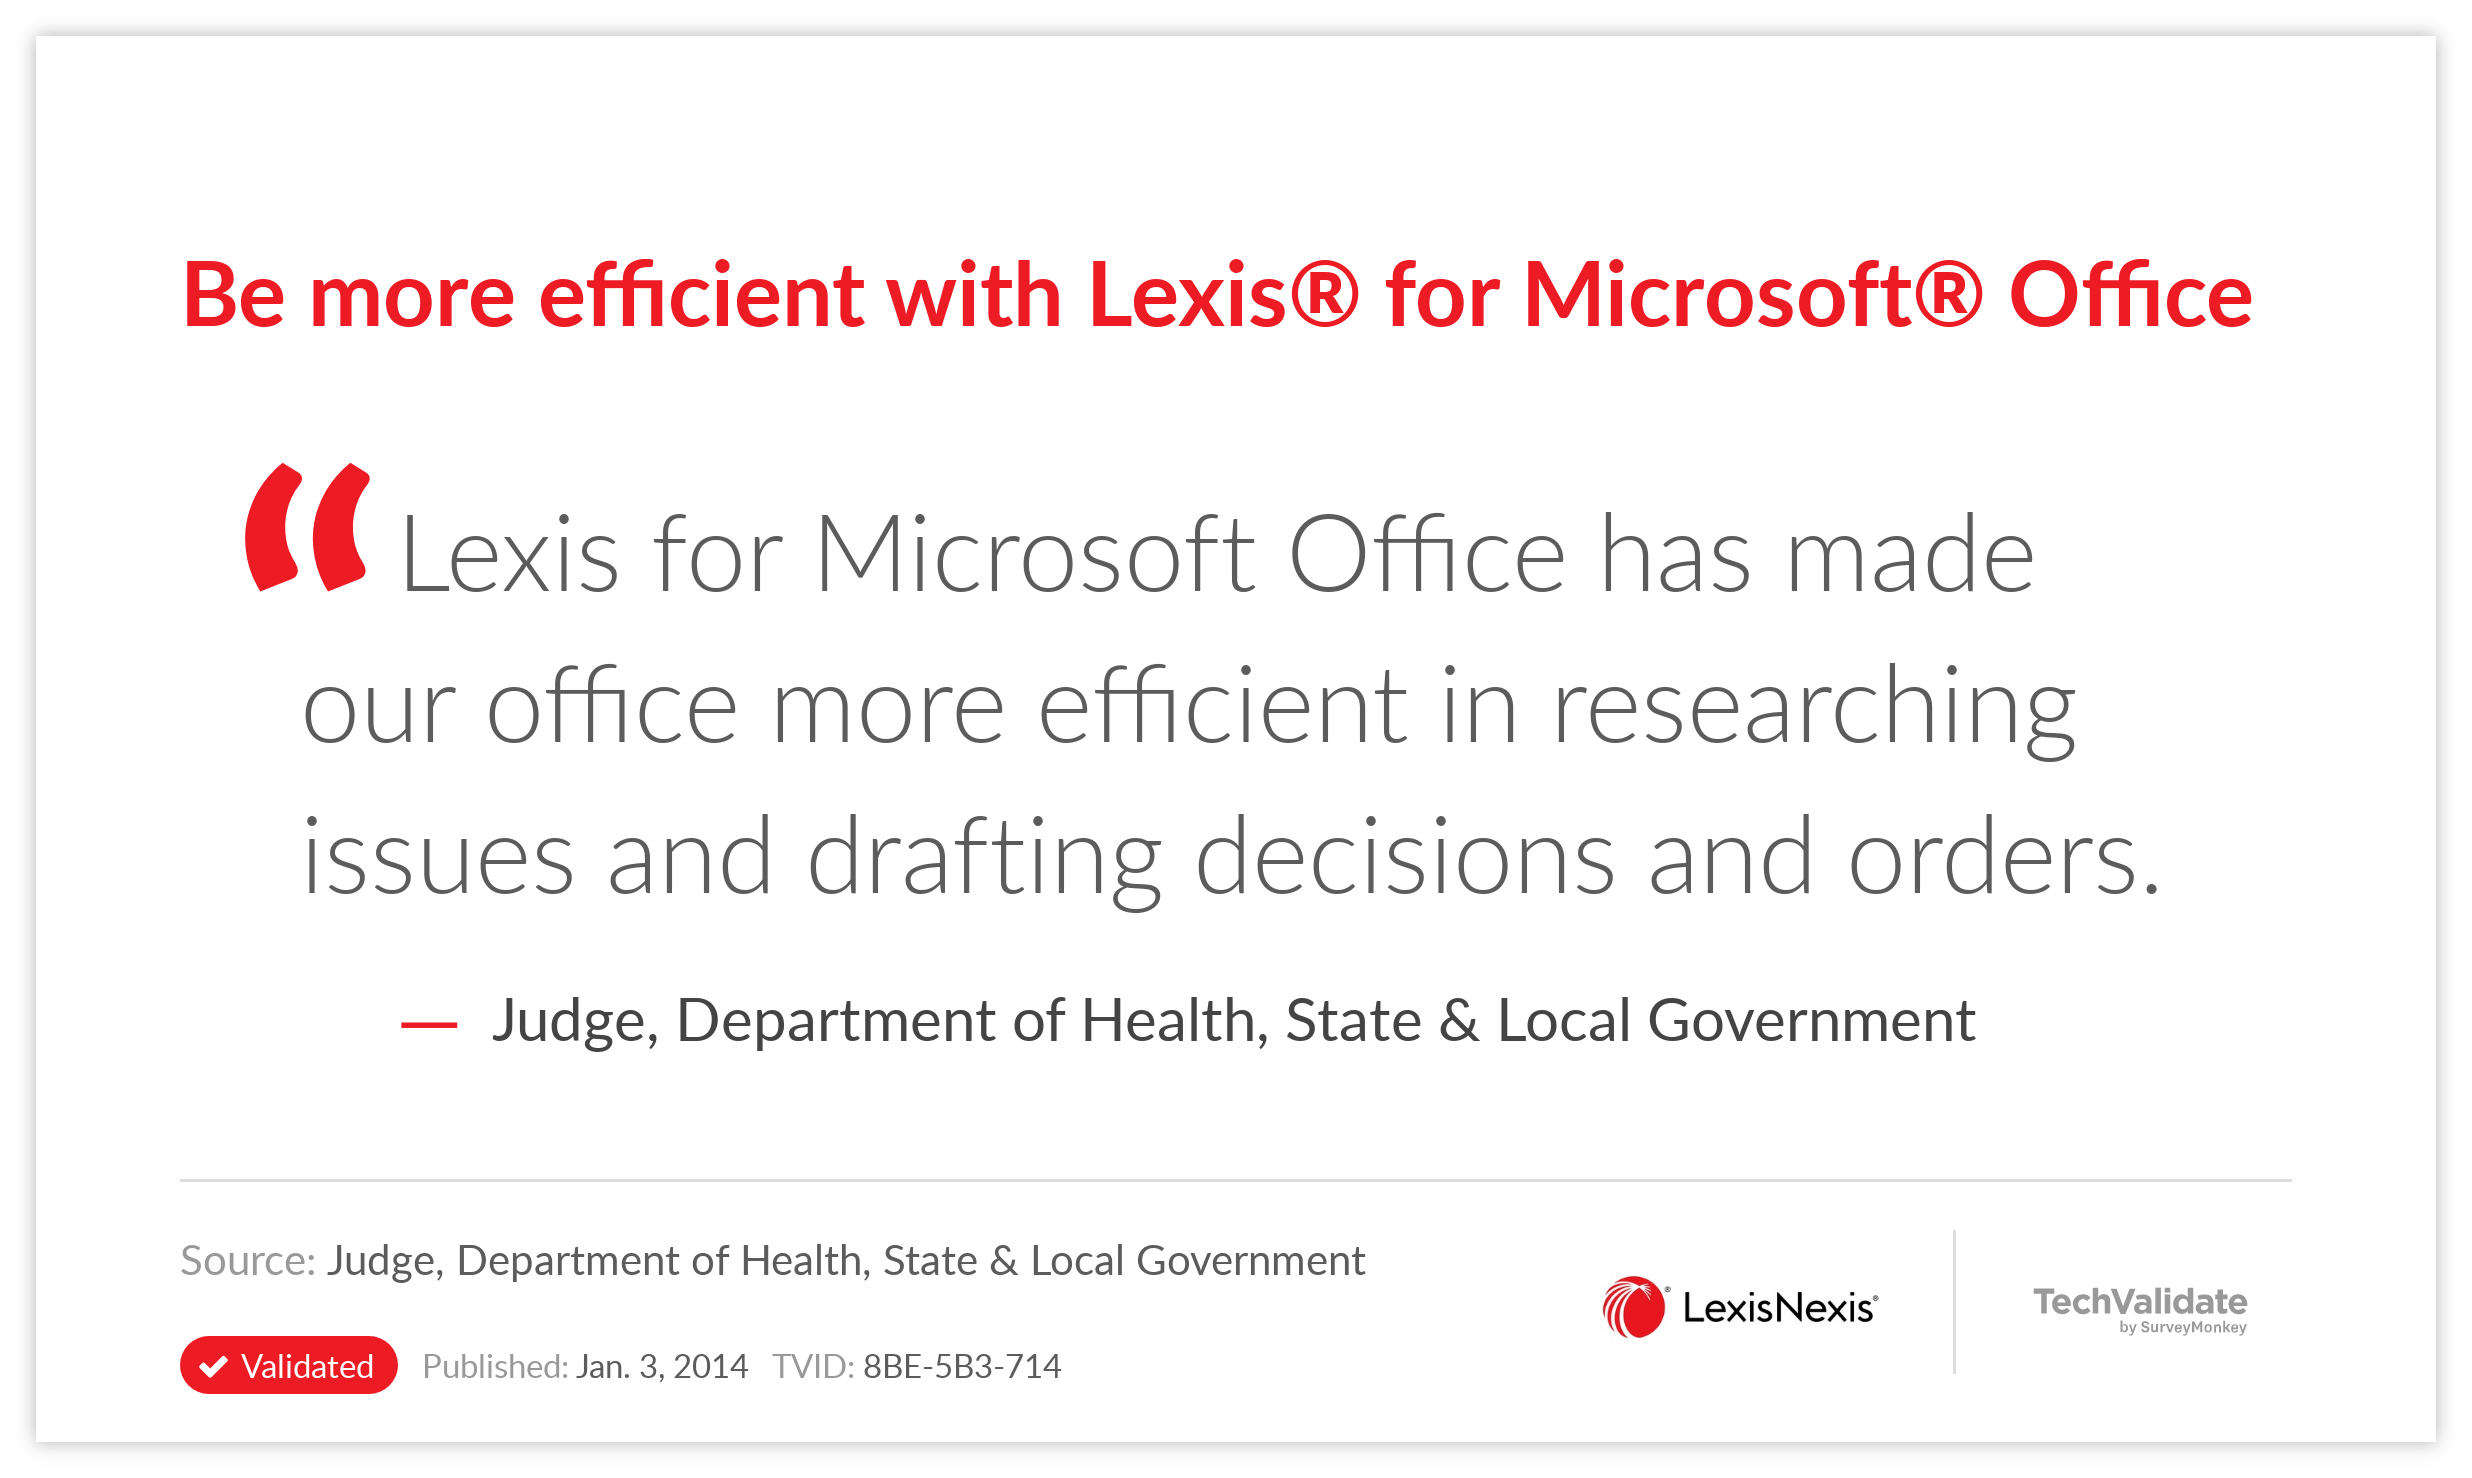 Be more efficient with Lexis® for Microsoft® Office